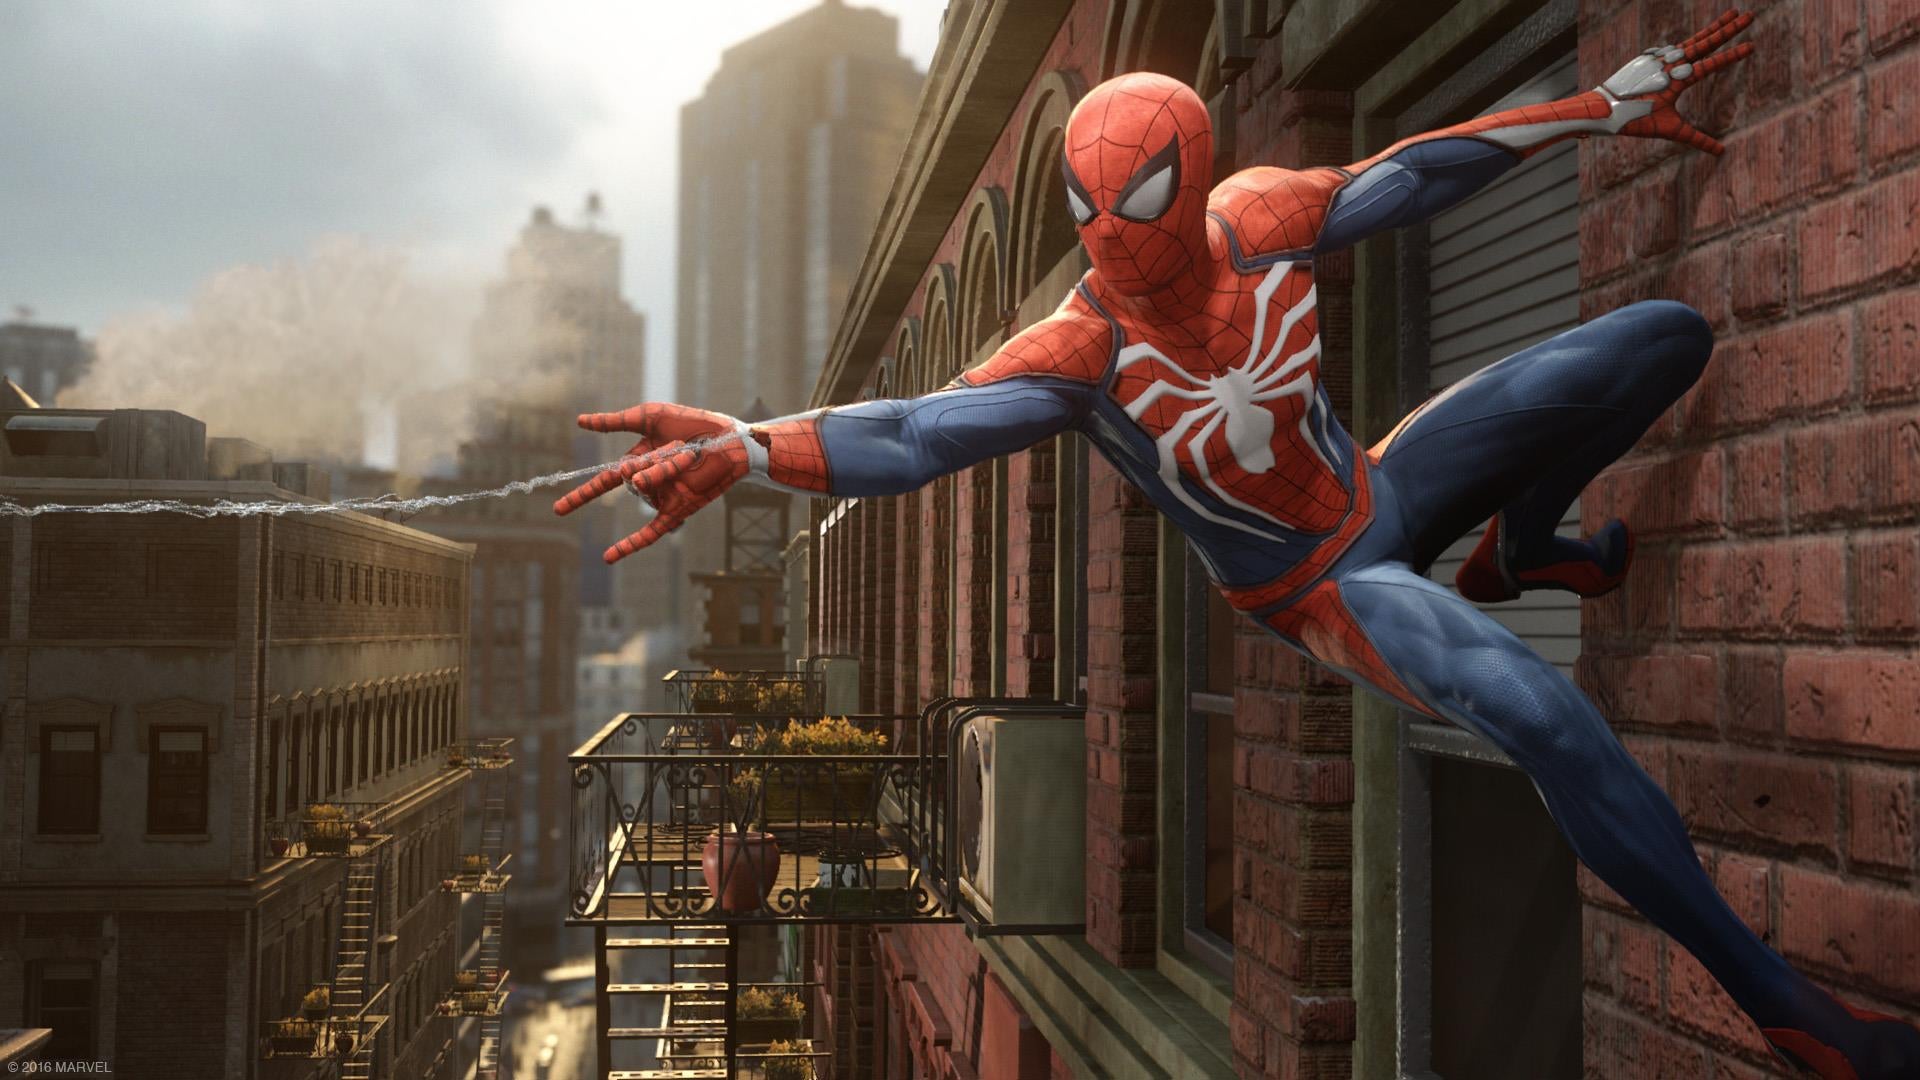 Image for Insomniac's Spider-Man game web-slings into view